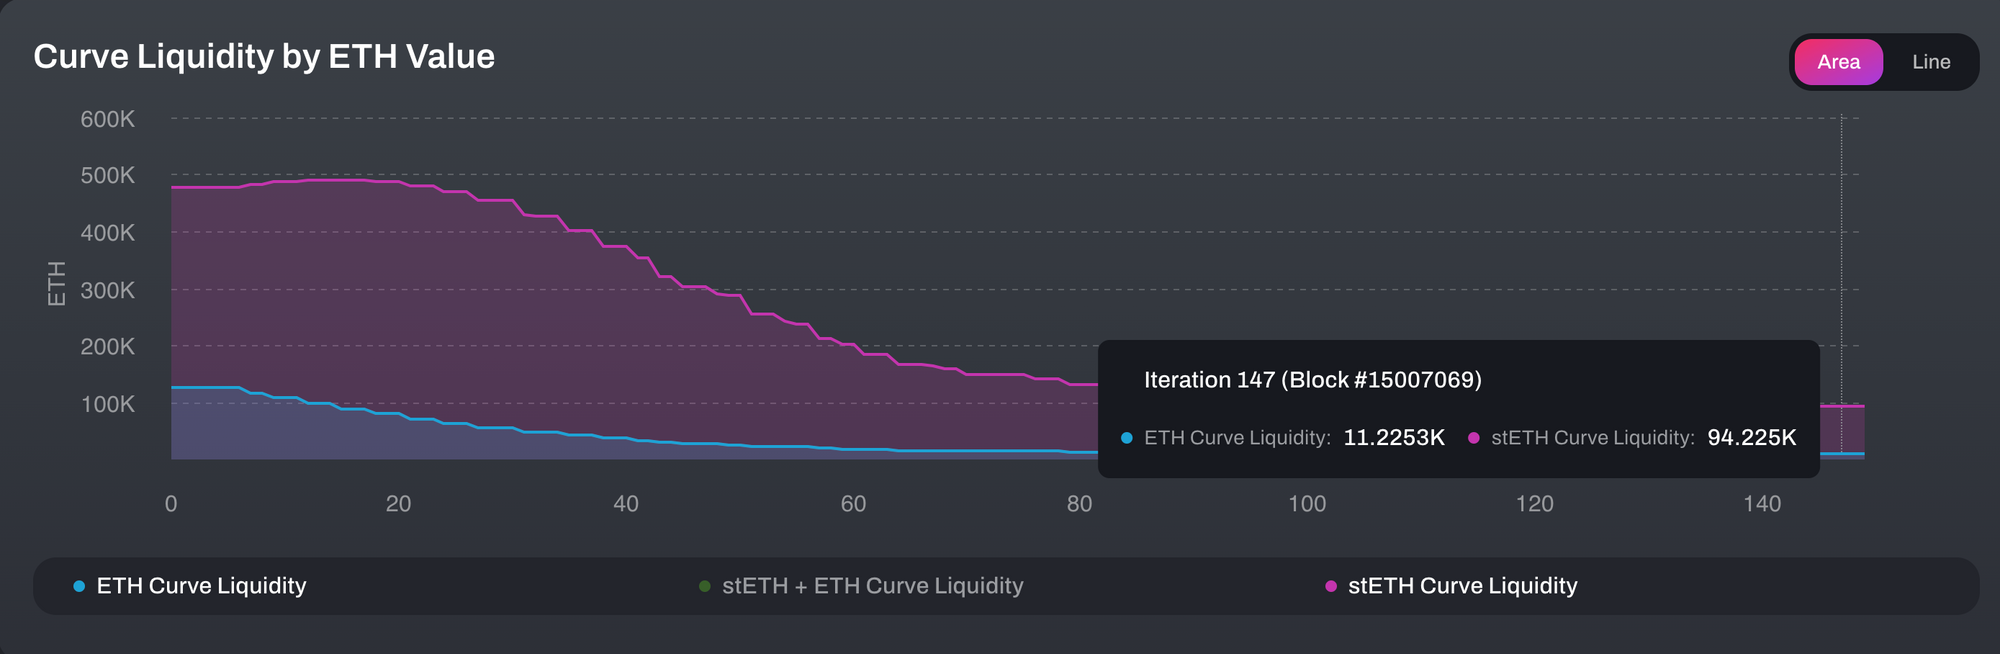 Curve Liquidity by Eth Value